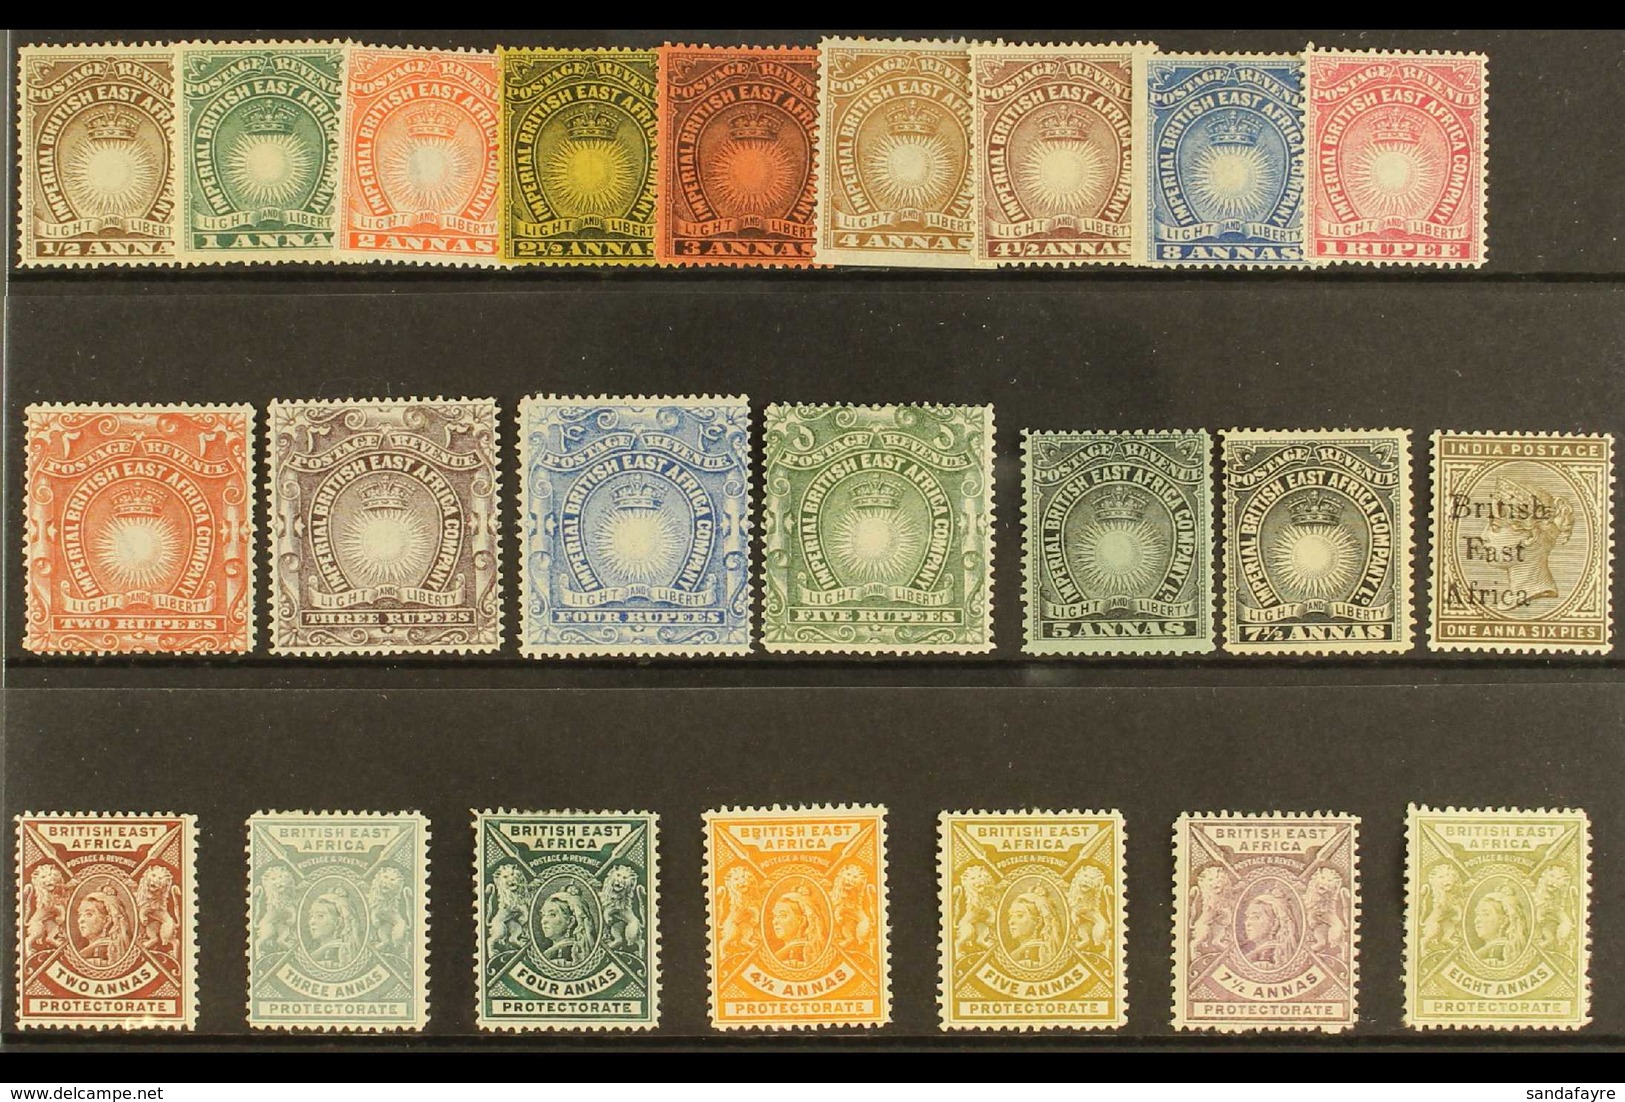 1890-1901 MINT SELECTION On Stock Card With 1890-95 "Light & Liberty" Range With Most Values To 5r & 1896-1901 CA Wmk Ra - British East Africa